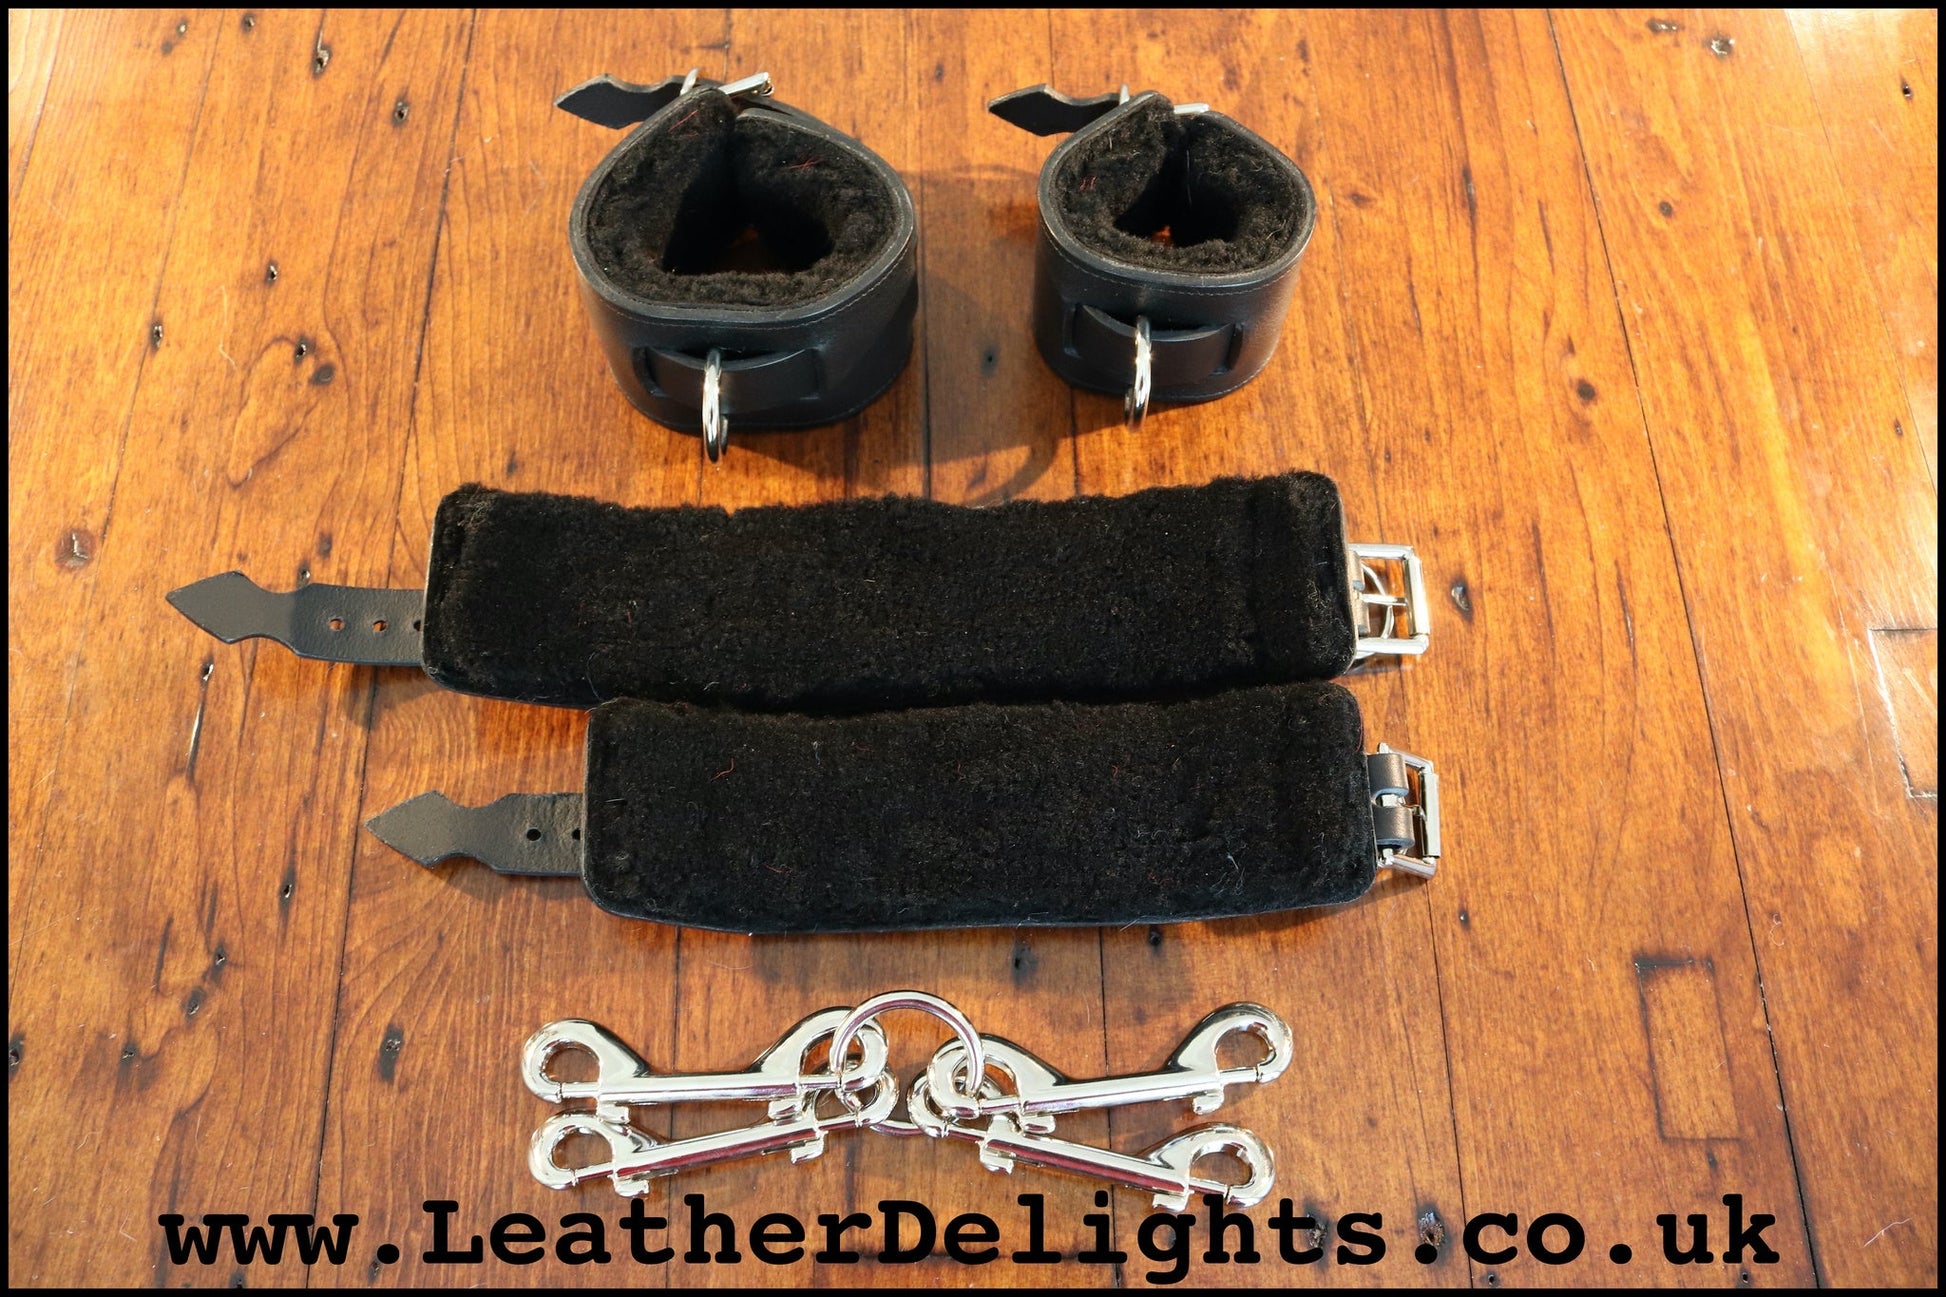 Black Wrist & Ankle Cuffs with Sheepskin Lining - Leather Delights